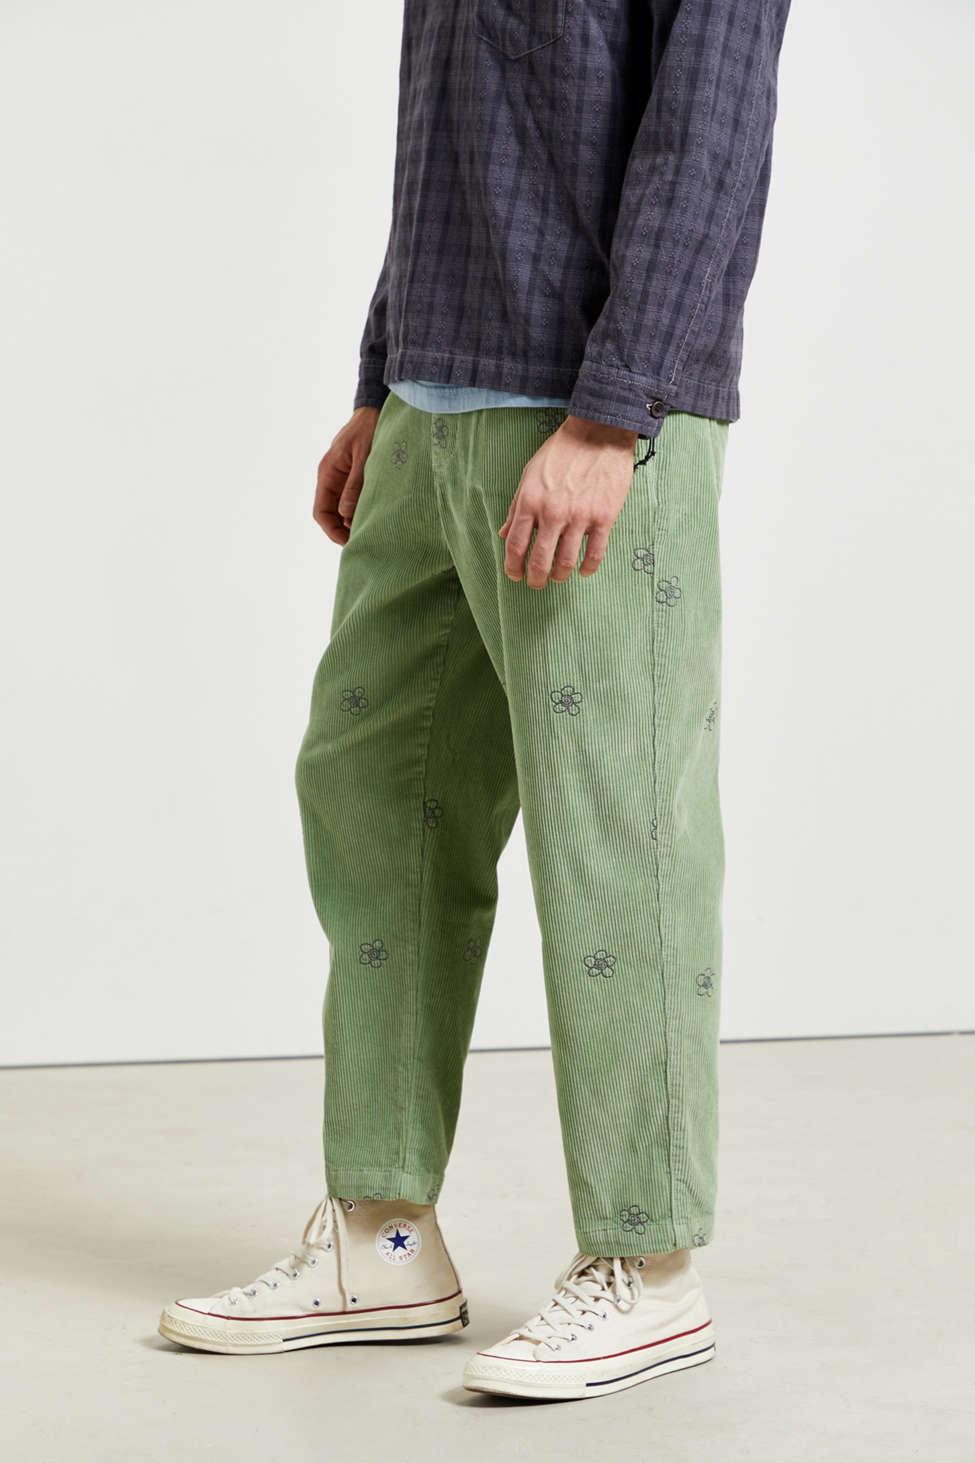 Urban Outfitters Uo Embroidered Corduroy Beach Pant in Green for Men - Lyst